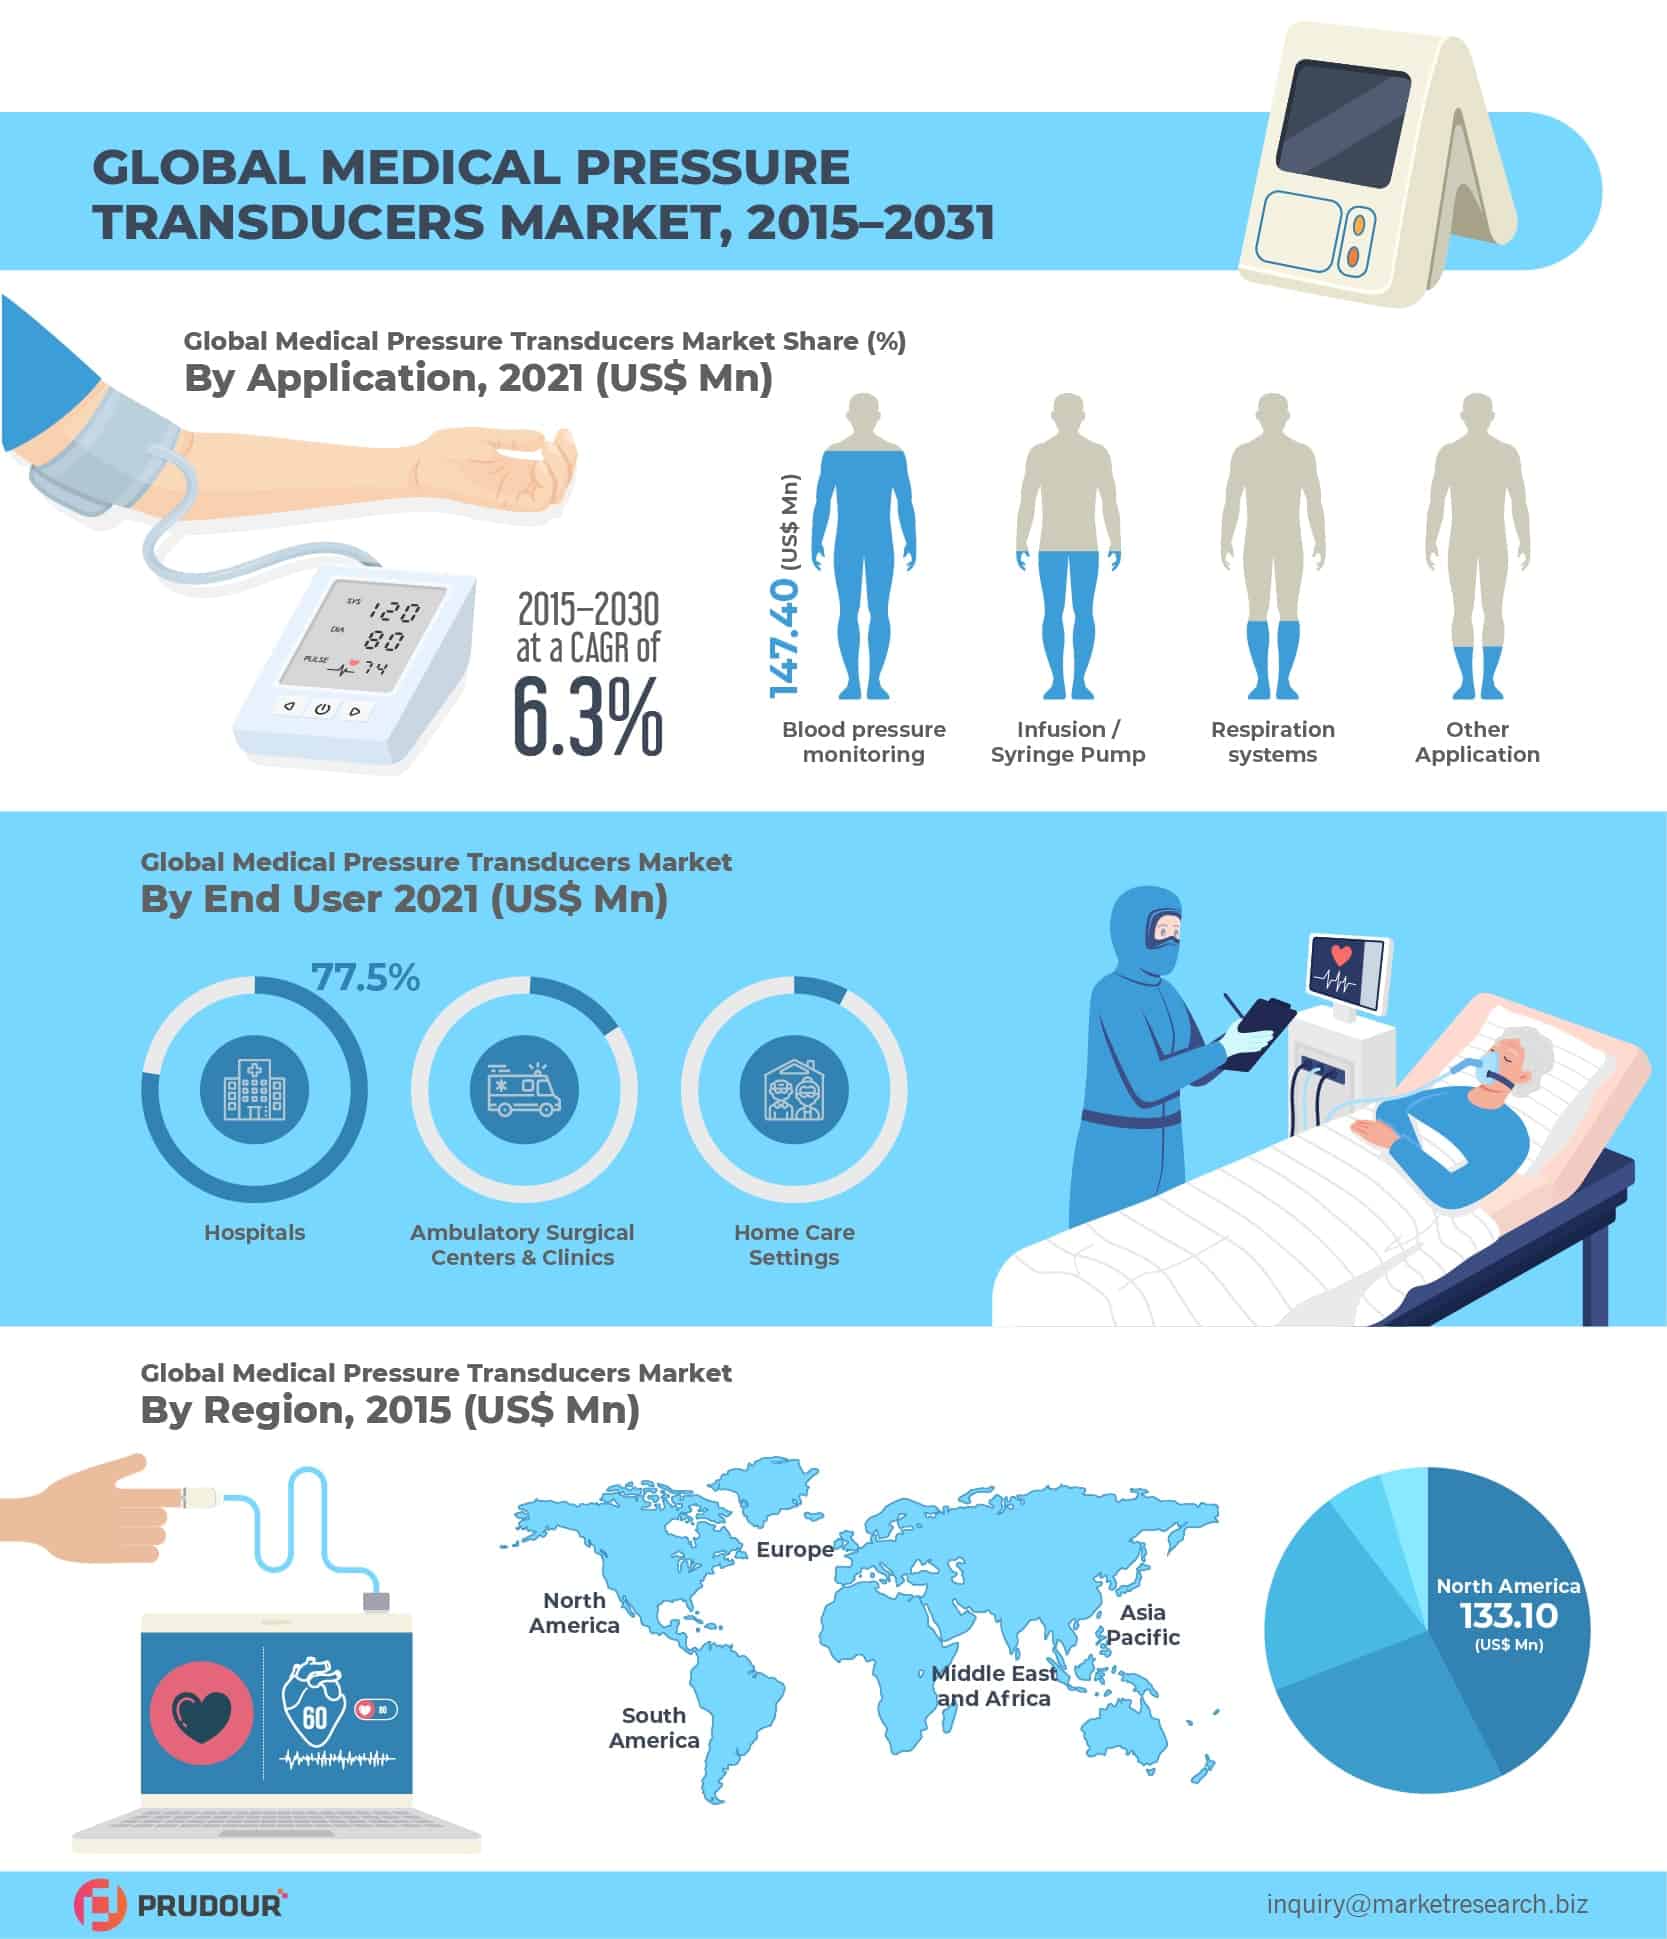 Global Medical Pressure Transducers Market is projected to reach US $ 547.6 Mn in 2030 at a CAGR of 6.3 % from 2022 to 2031